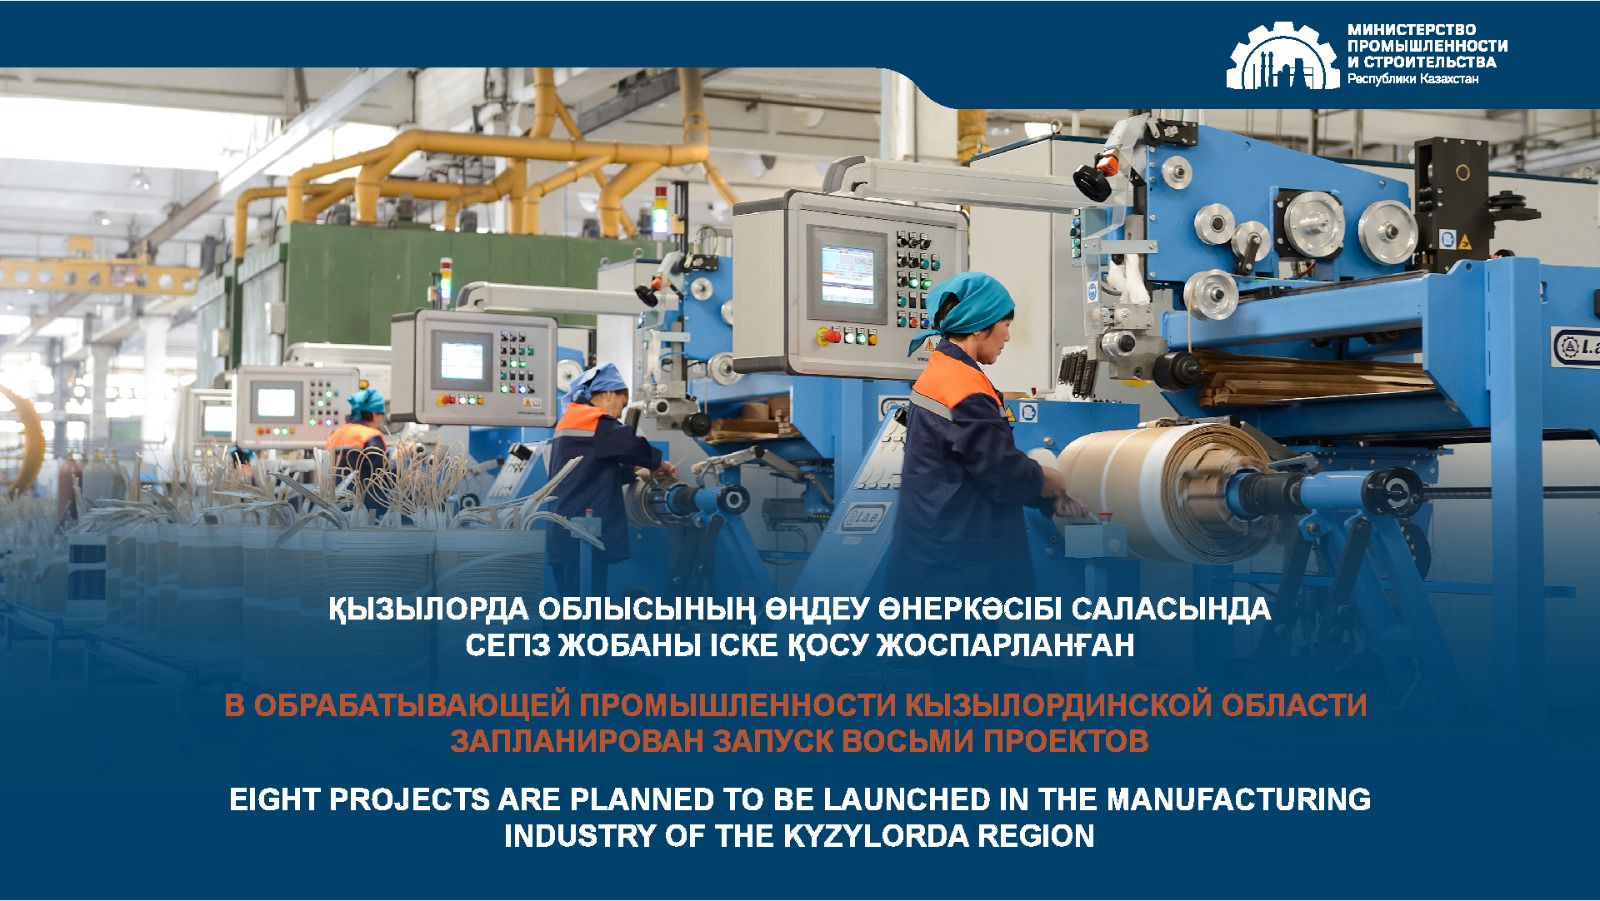 Eight projects are planned to be launched in the manufacturing industry of the Kyzylorda region